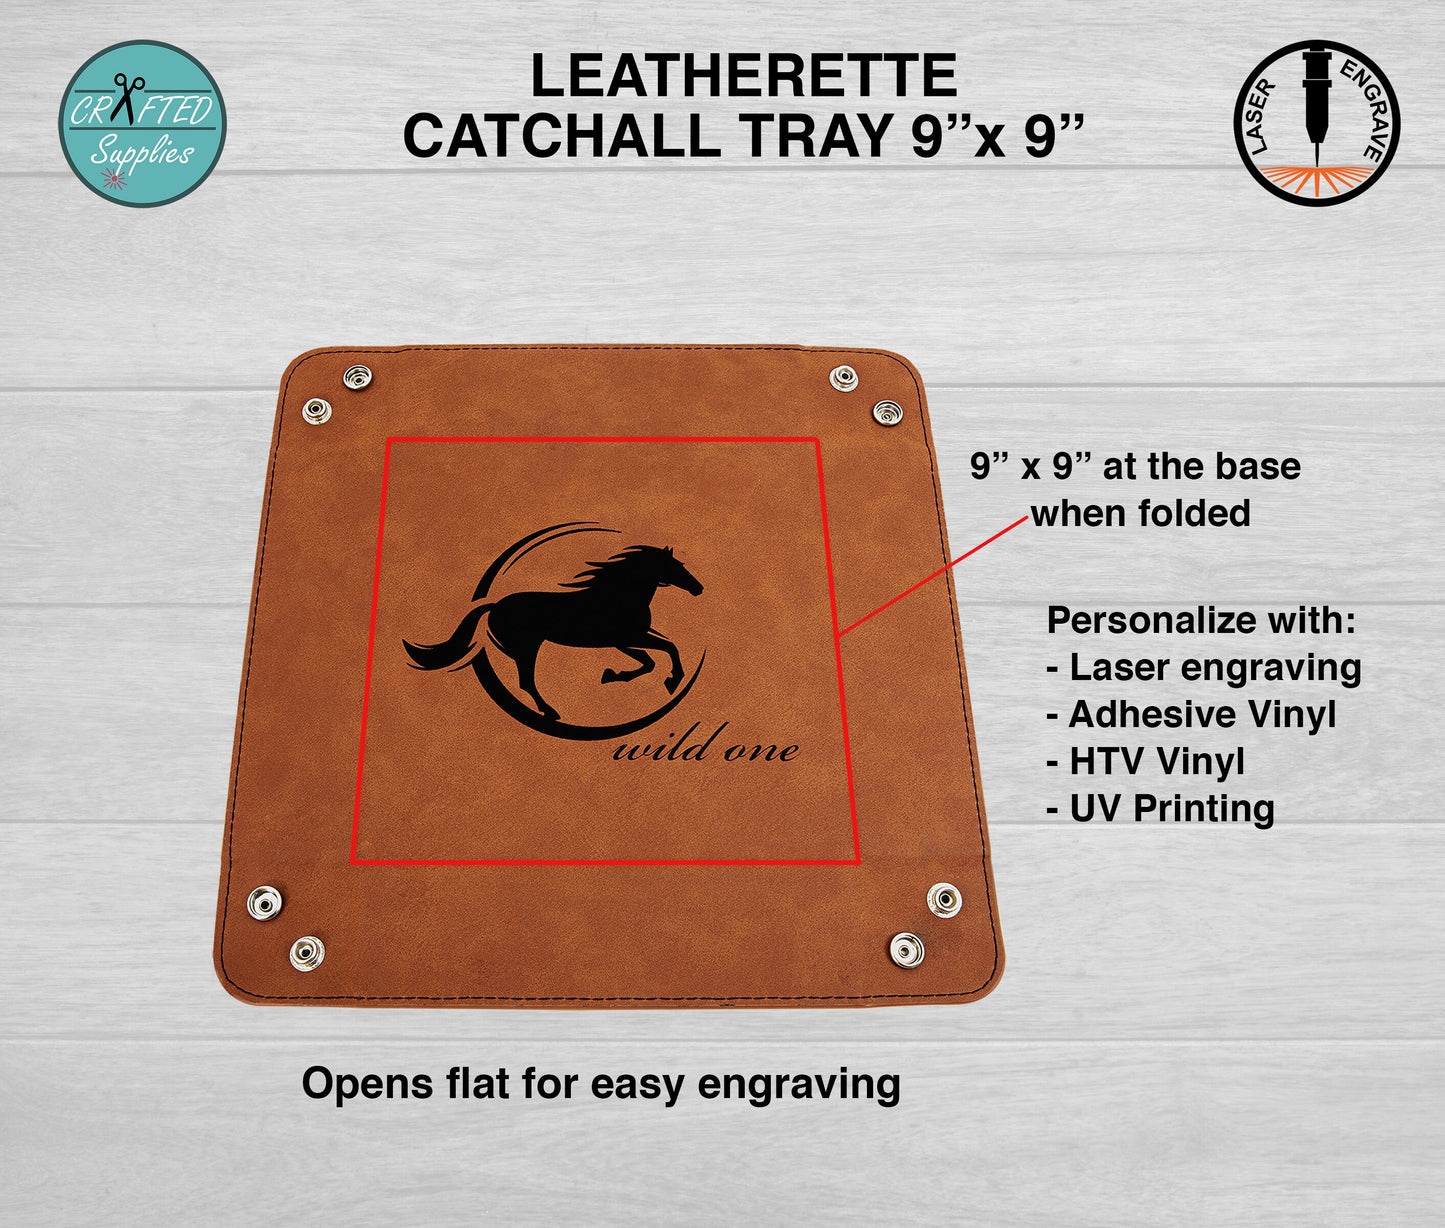 Leatherette Catchall tray, Valet Tray 9 in x 9 in